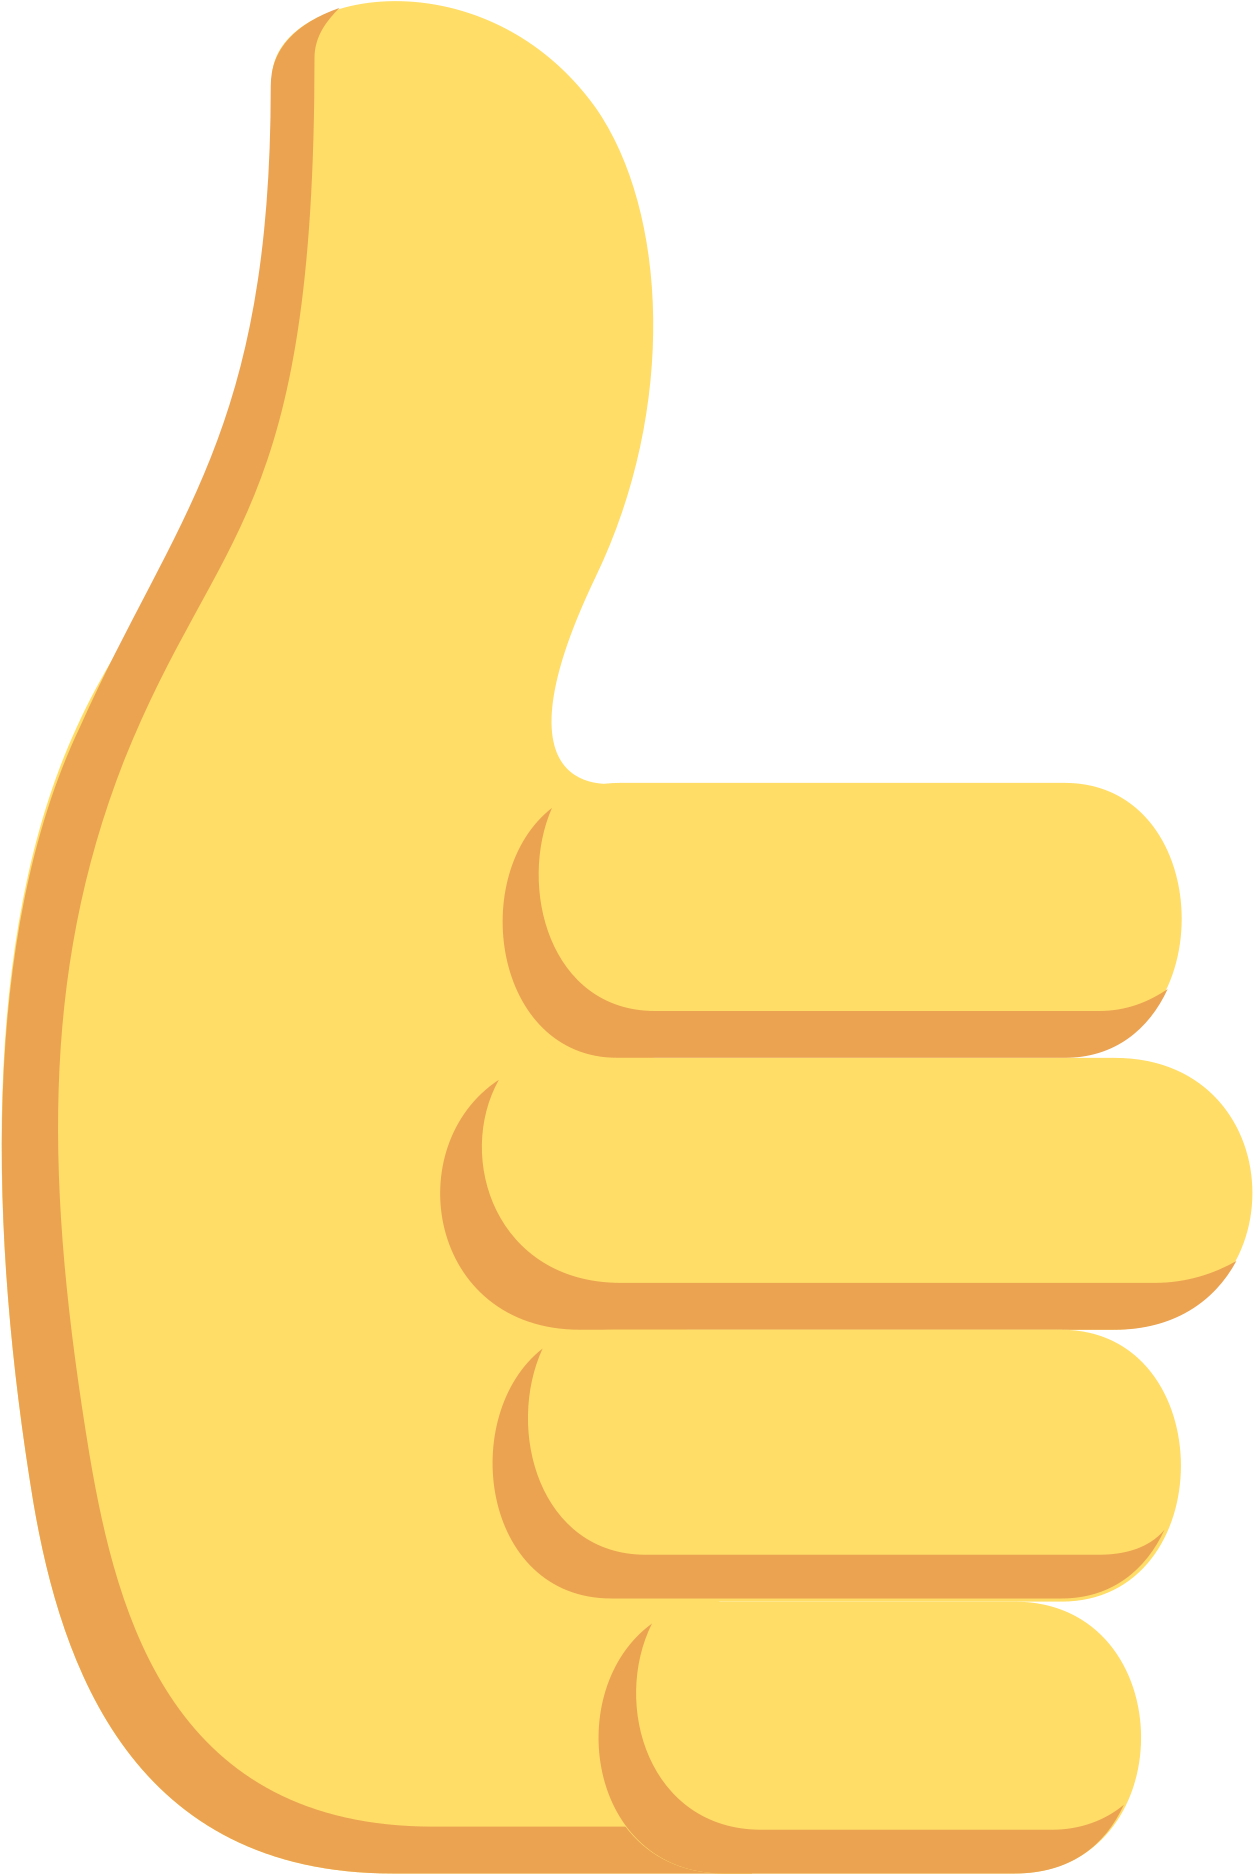 Thumbs Up Rock Can I Get A Thumbs Up For This Blog - Thumbs Up Emoji Discord (2000x2000)